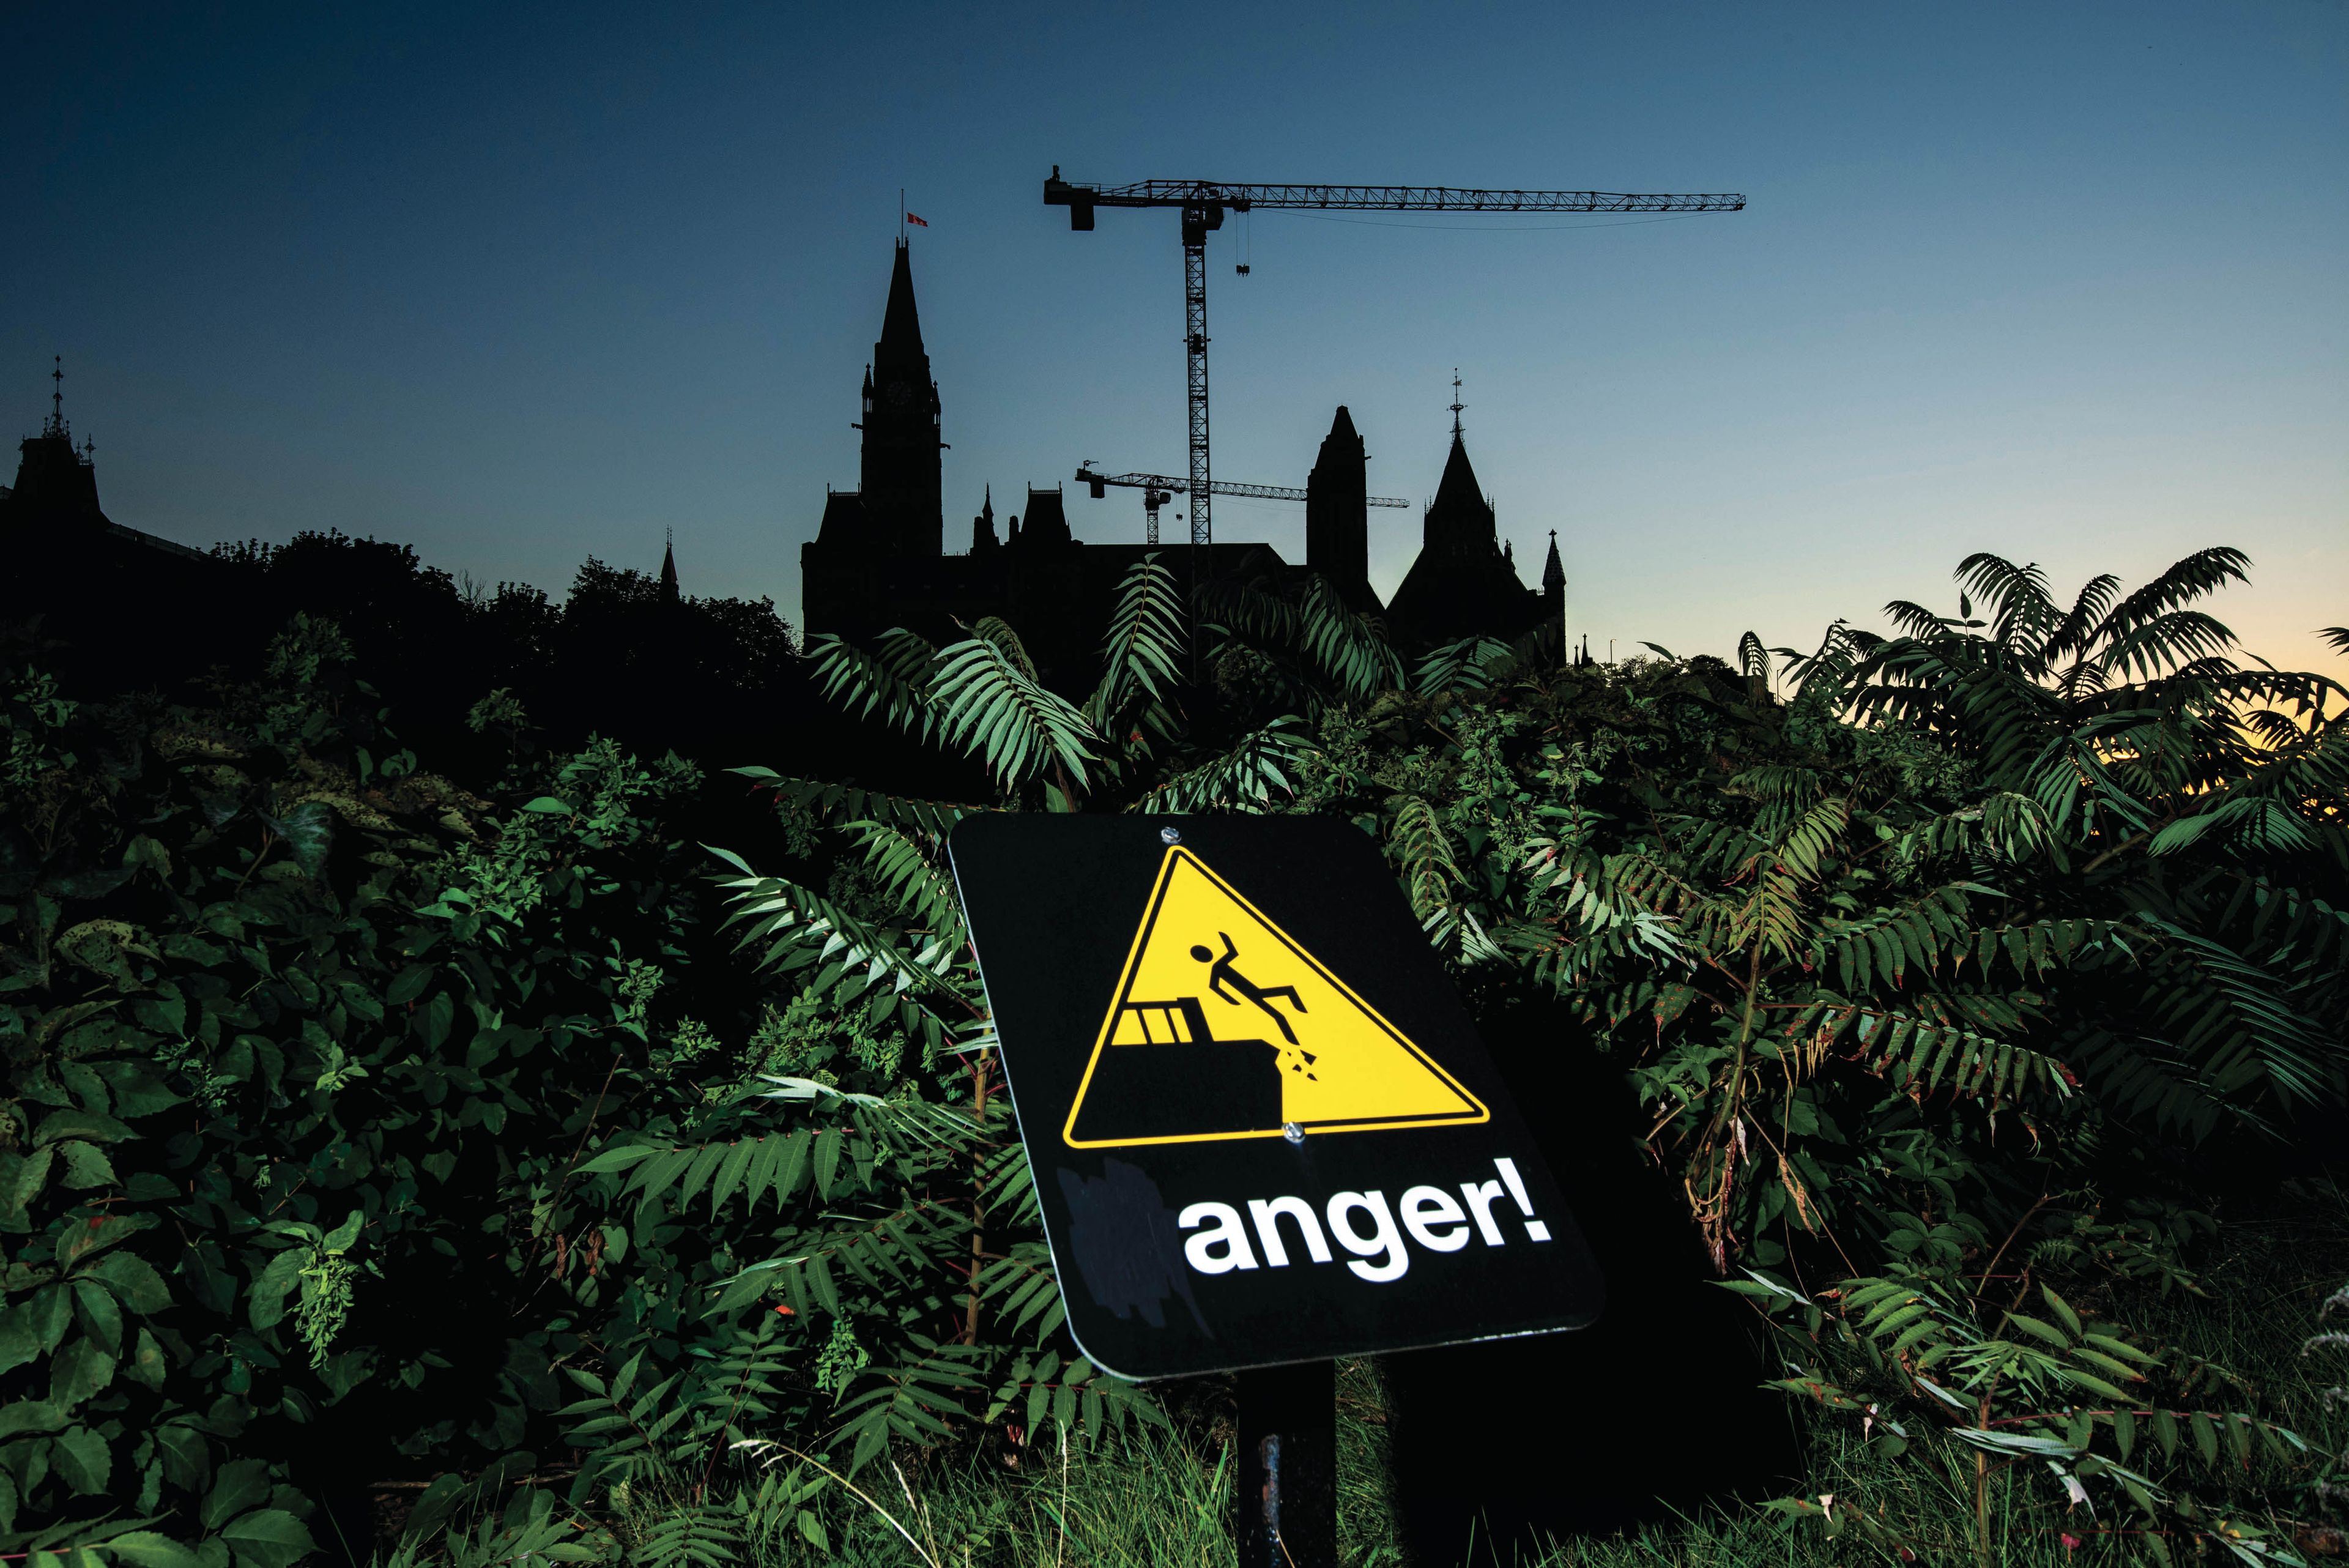 The letter "d" on a "danger" sign at Major's Hill park advising people to stay away from the cliff edge is painted over, leaving the word "anger", seen in front of Parliament Hill in Ottawa, on Thursday, Sept. 16, 2021. (Photograph by Justin Tang)